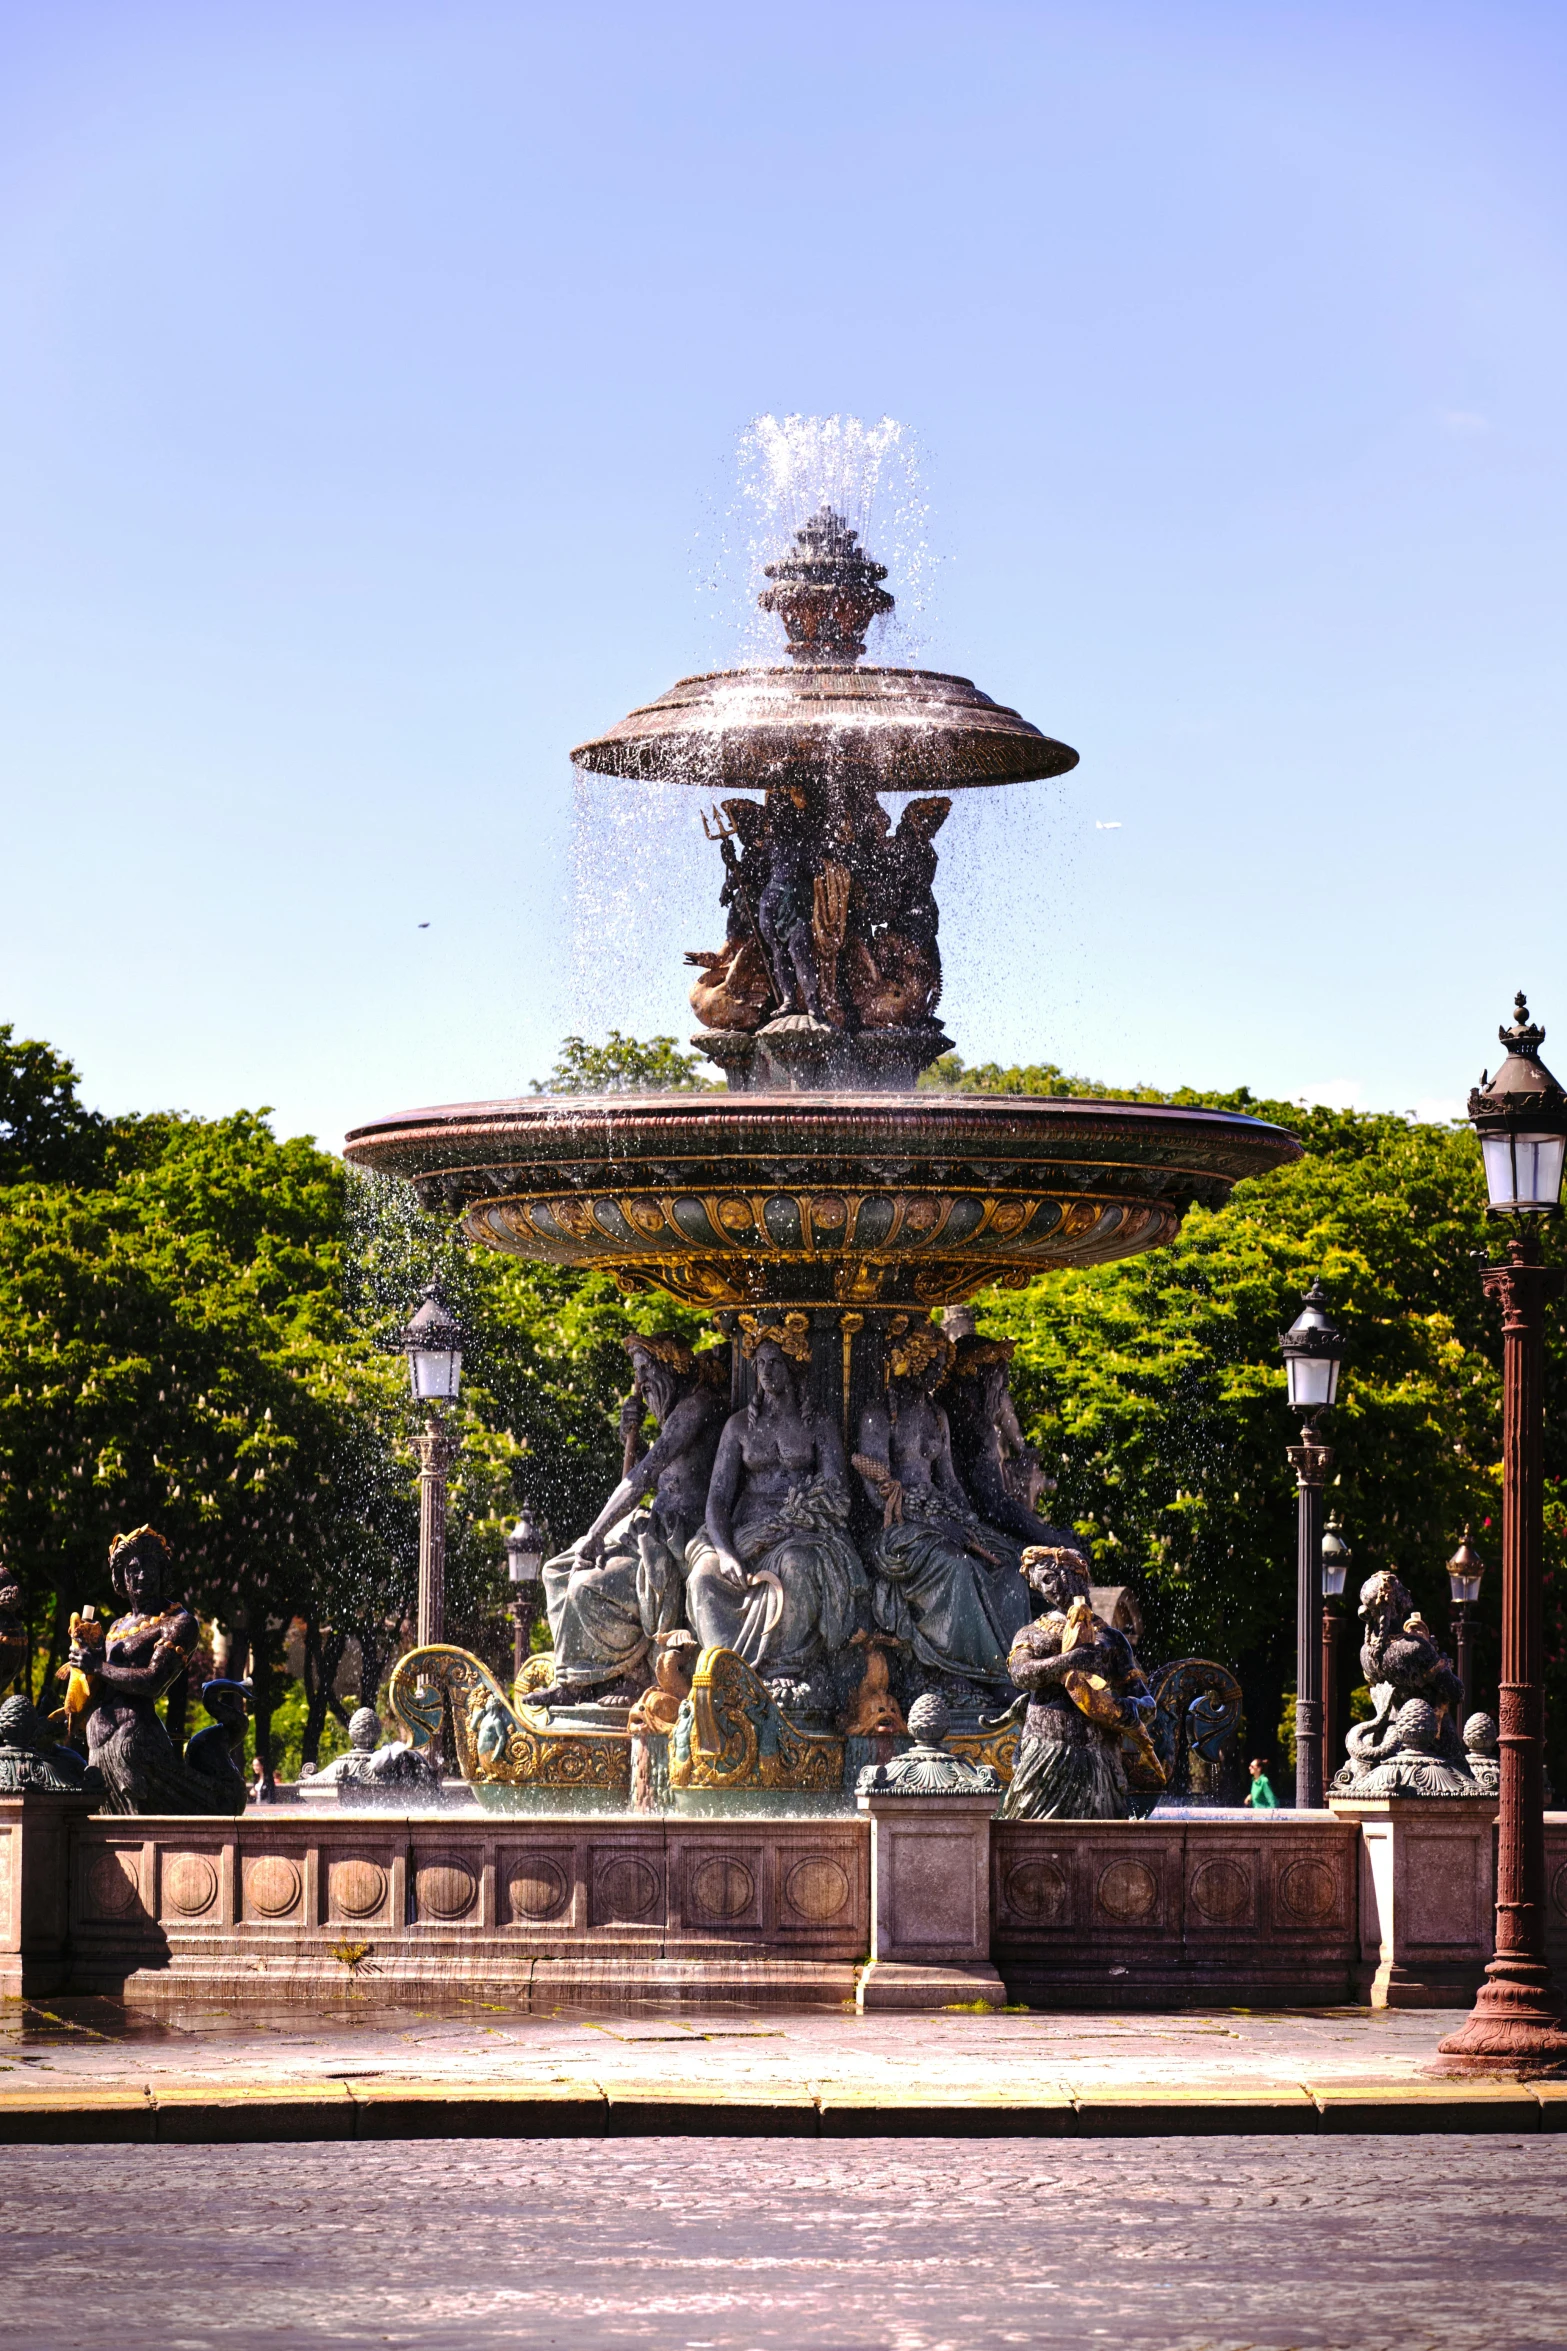 a fountain with a large head is situated on the sidewalk